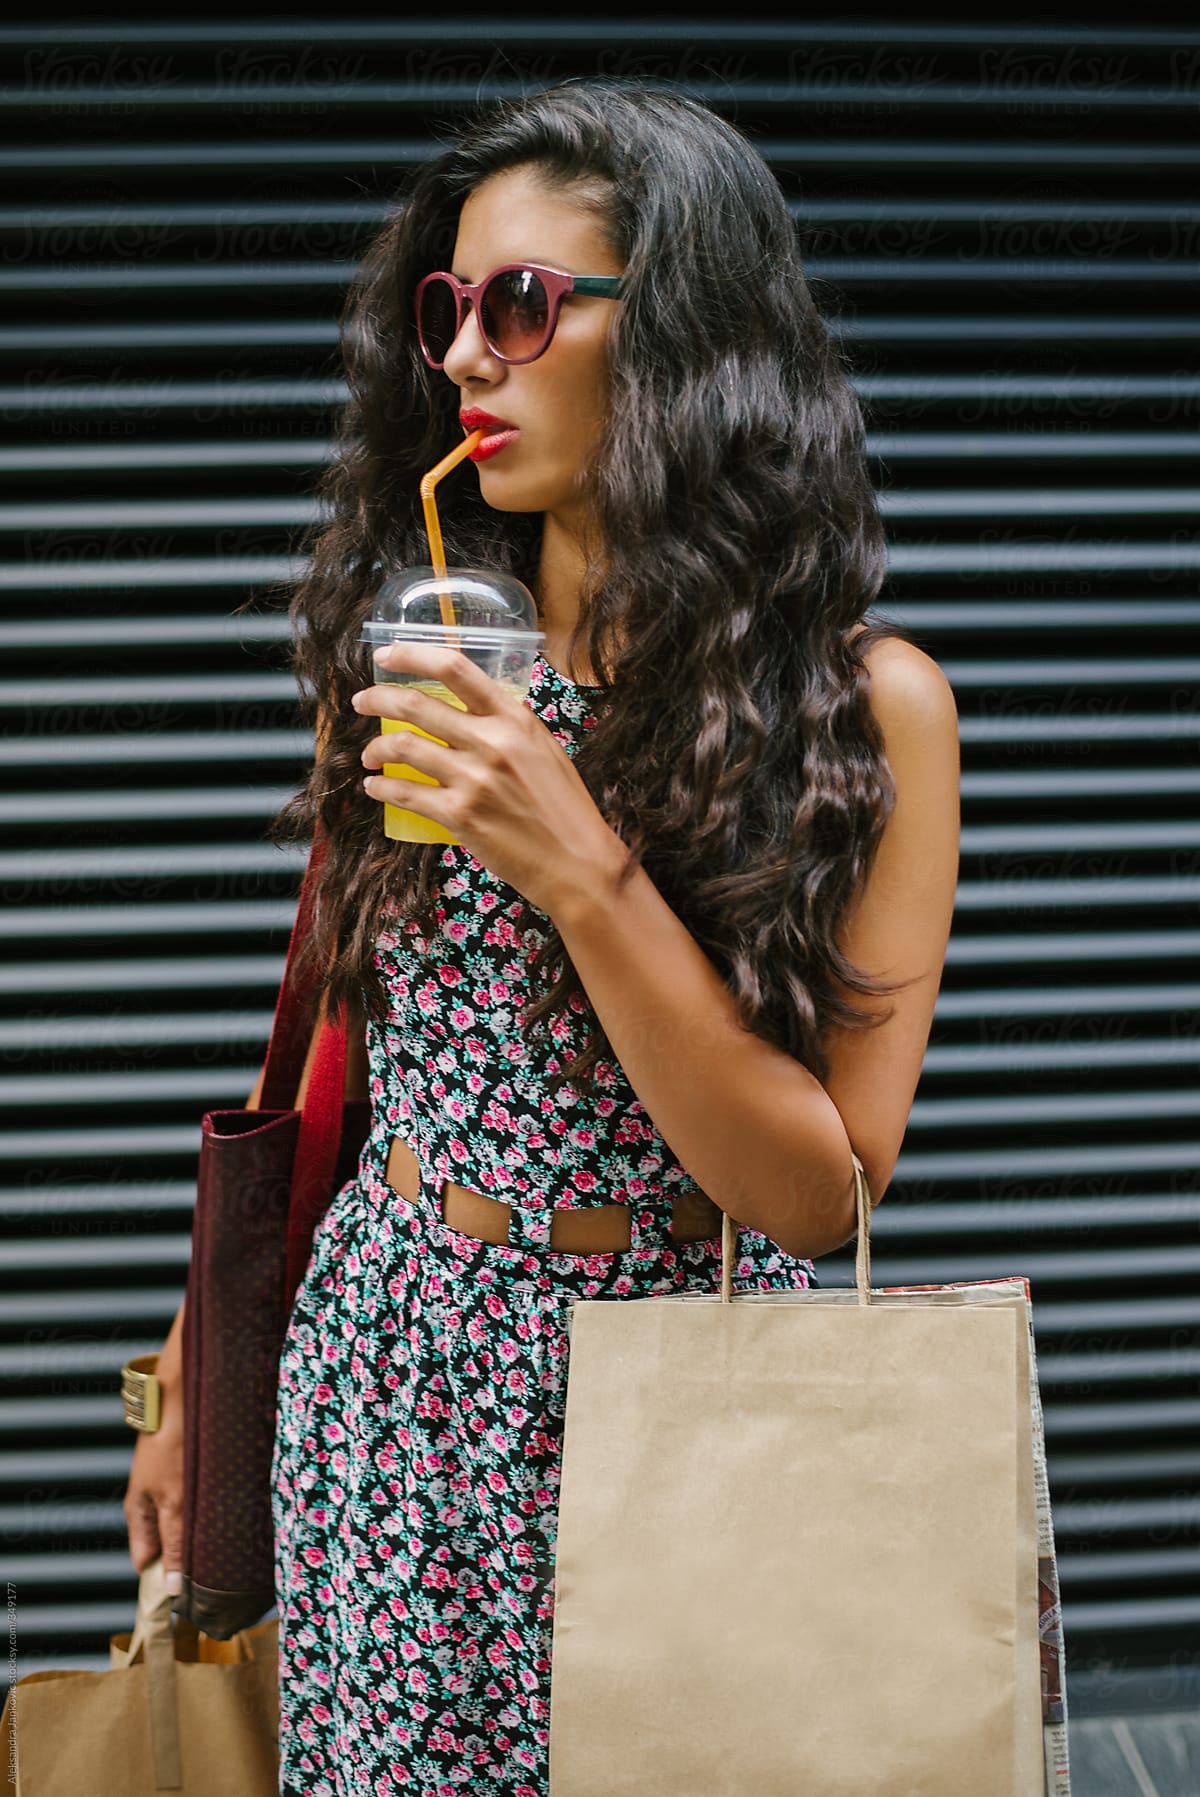 Young Brunette Woman with Shopping Bags Drinking Juice On The Street